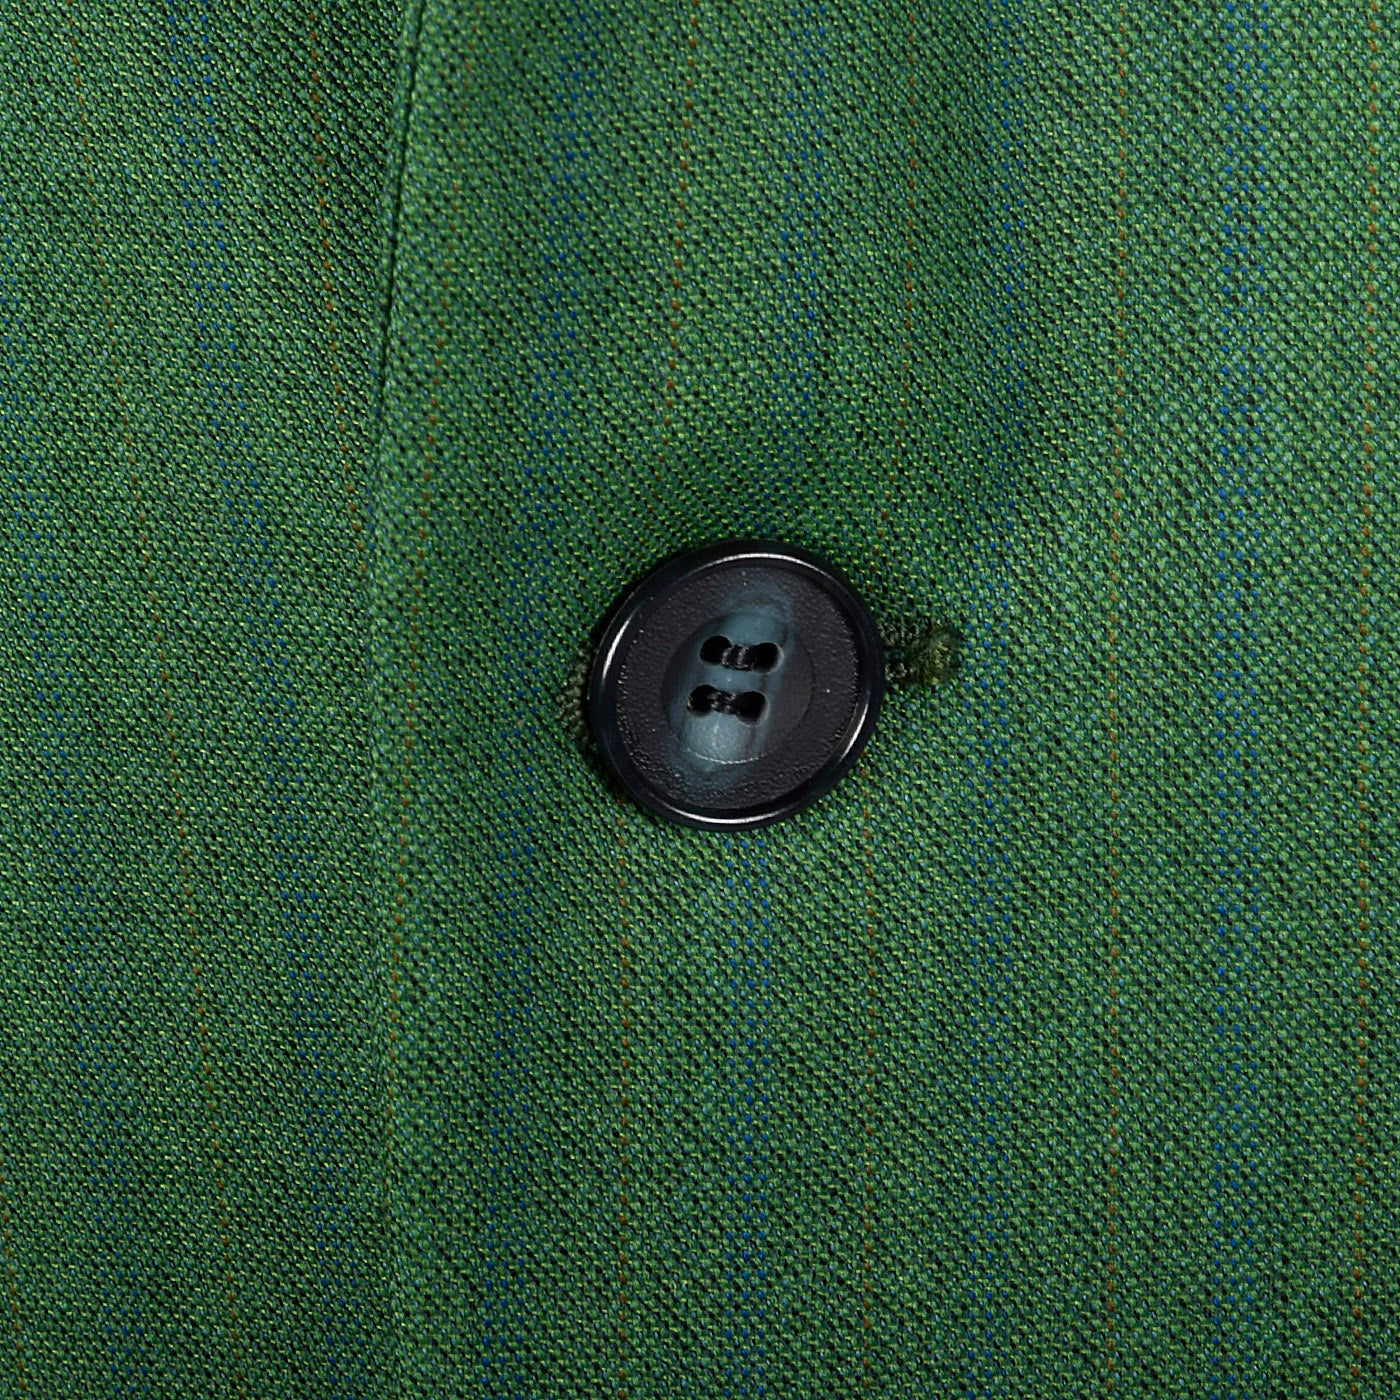 1960s Men's Bright Green Two Piece Suit